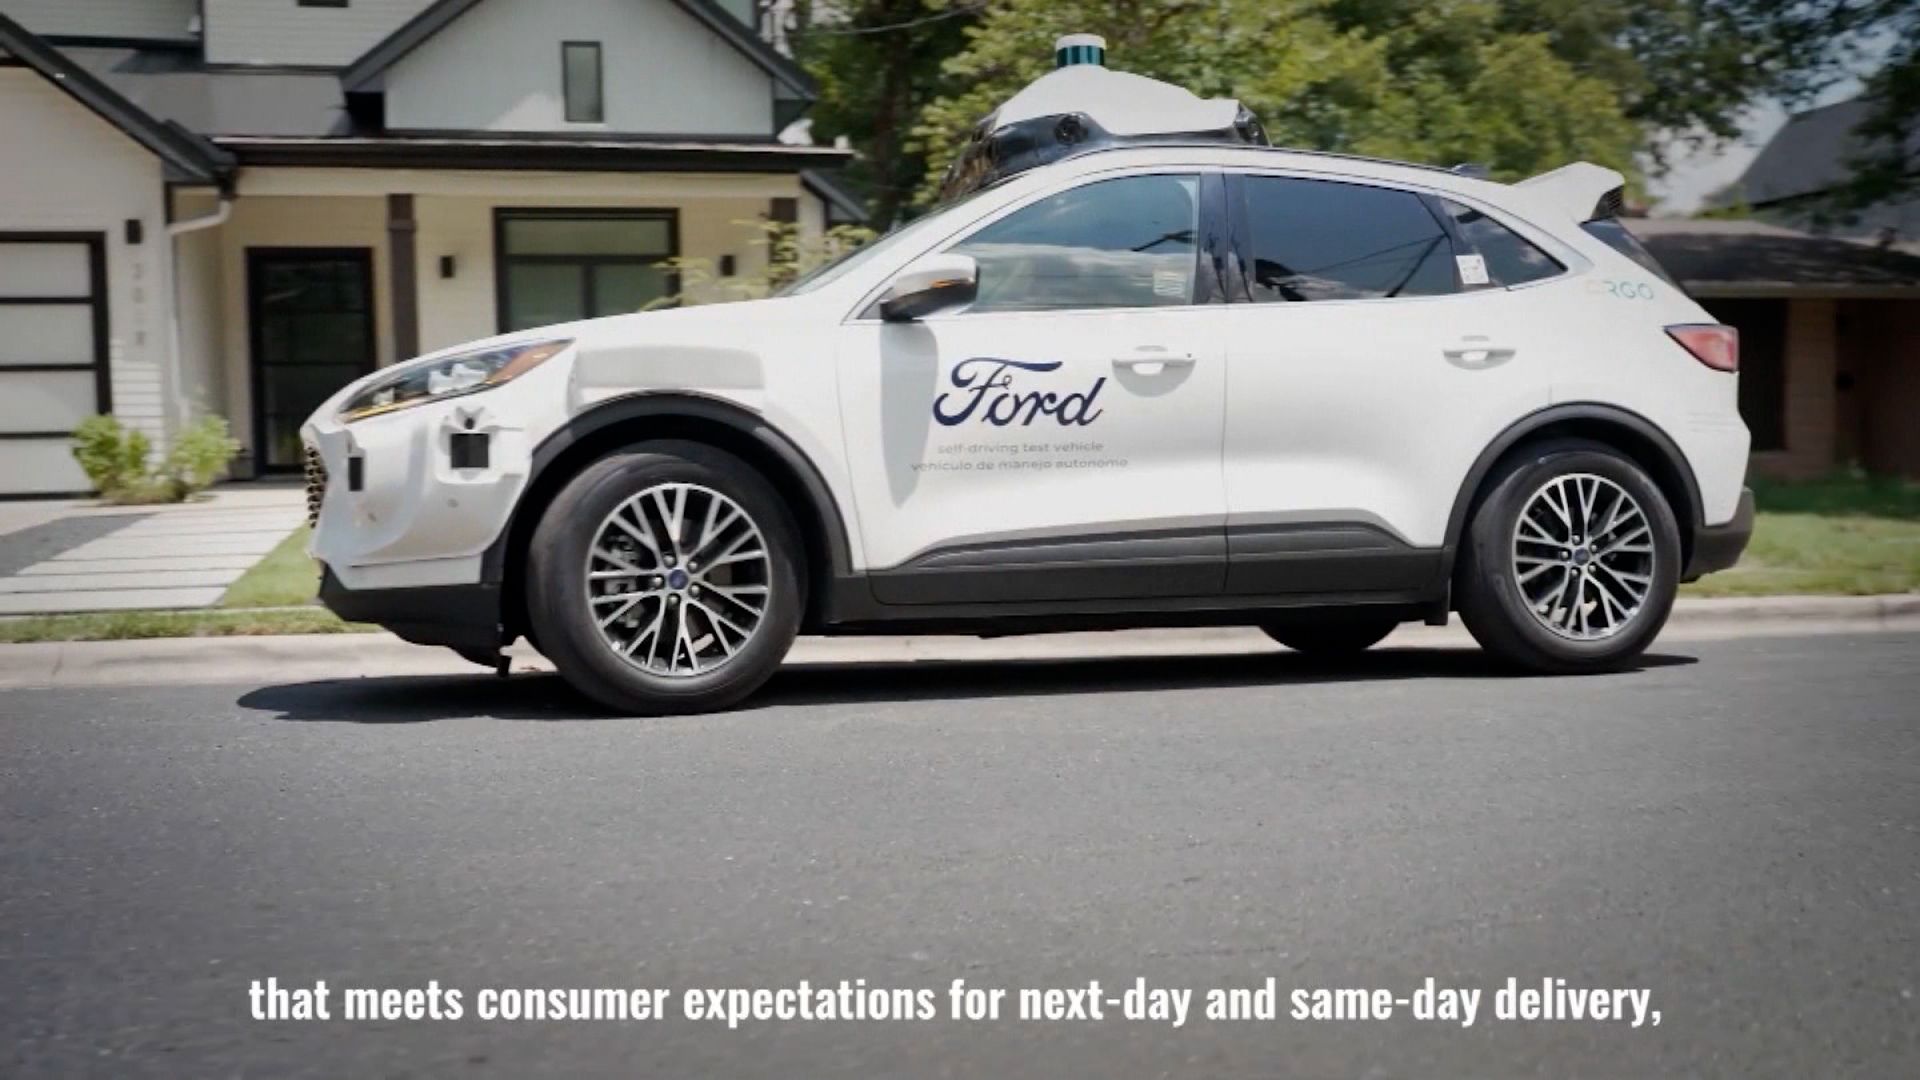 Miami in the AV driver's seat: Ford self-driving vehicles soon to make  deliveries for Walmart - Refresh Miami